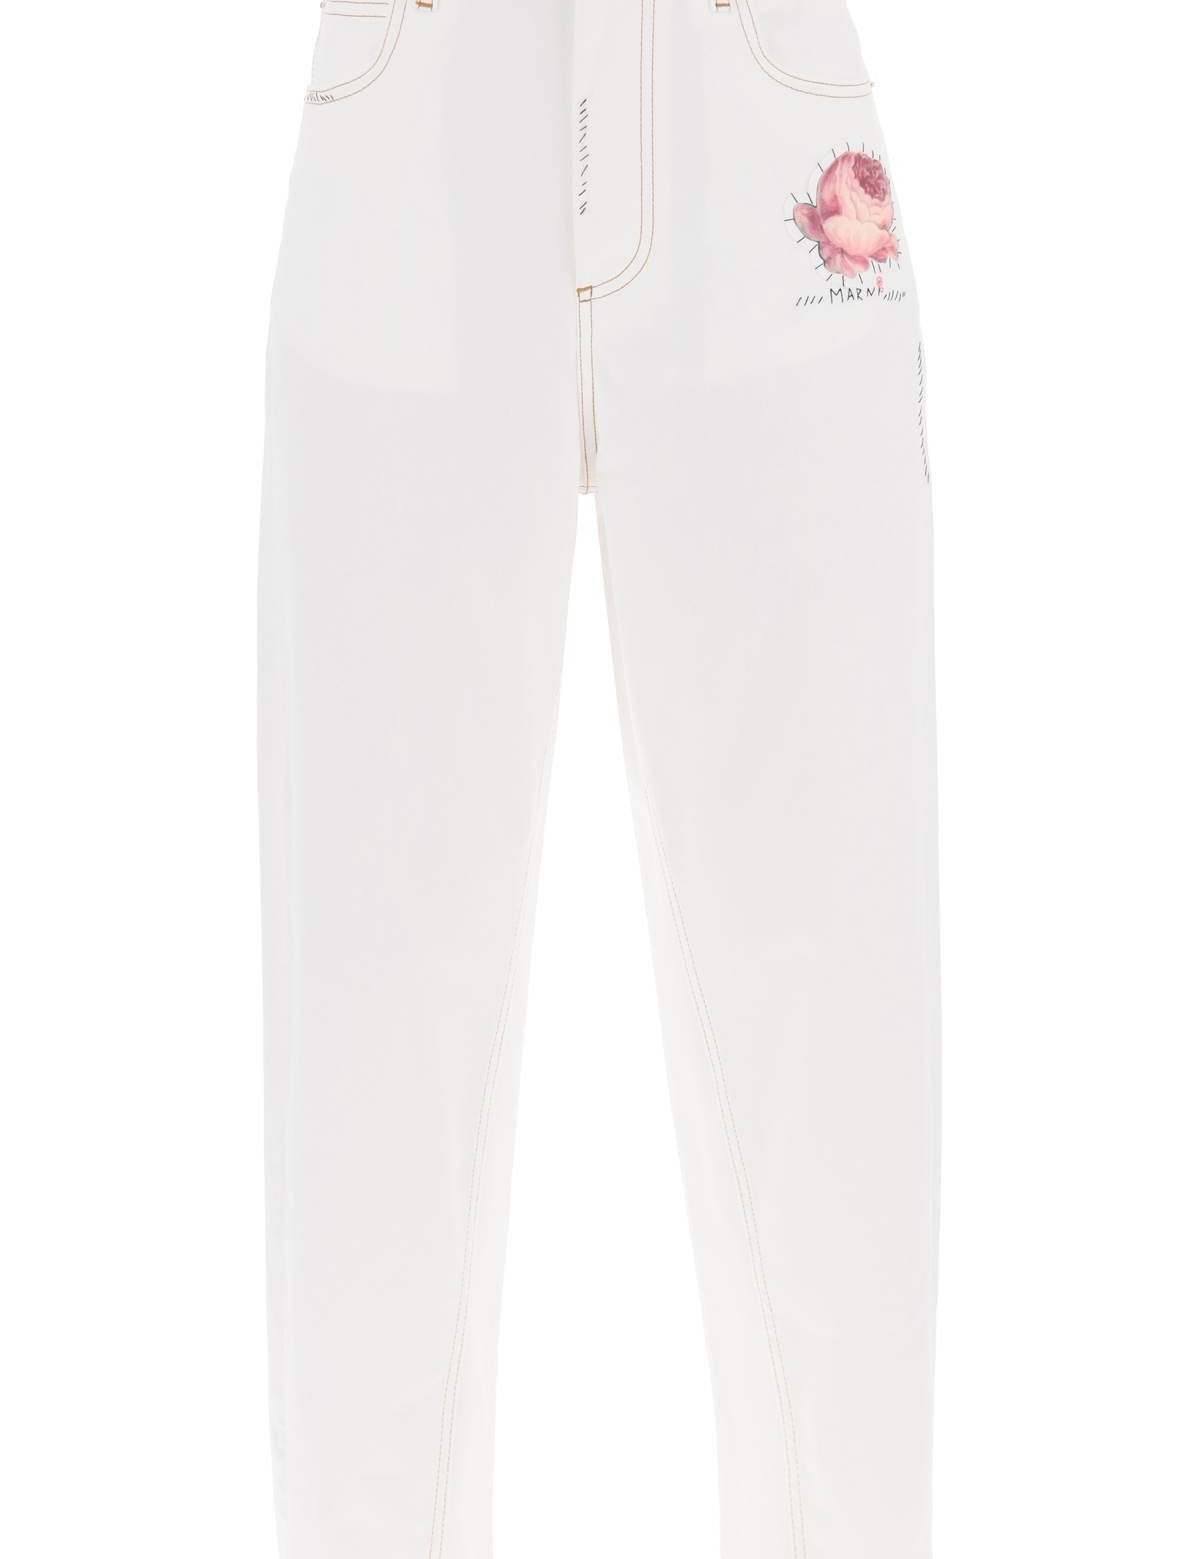 jeans-with-embroidered-logo-and-flower-patch.jpg